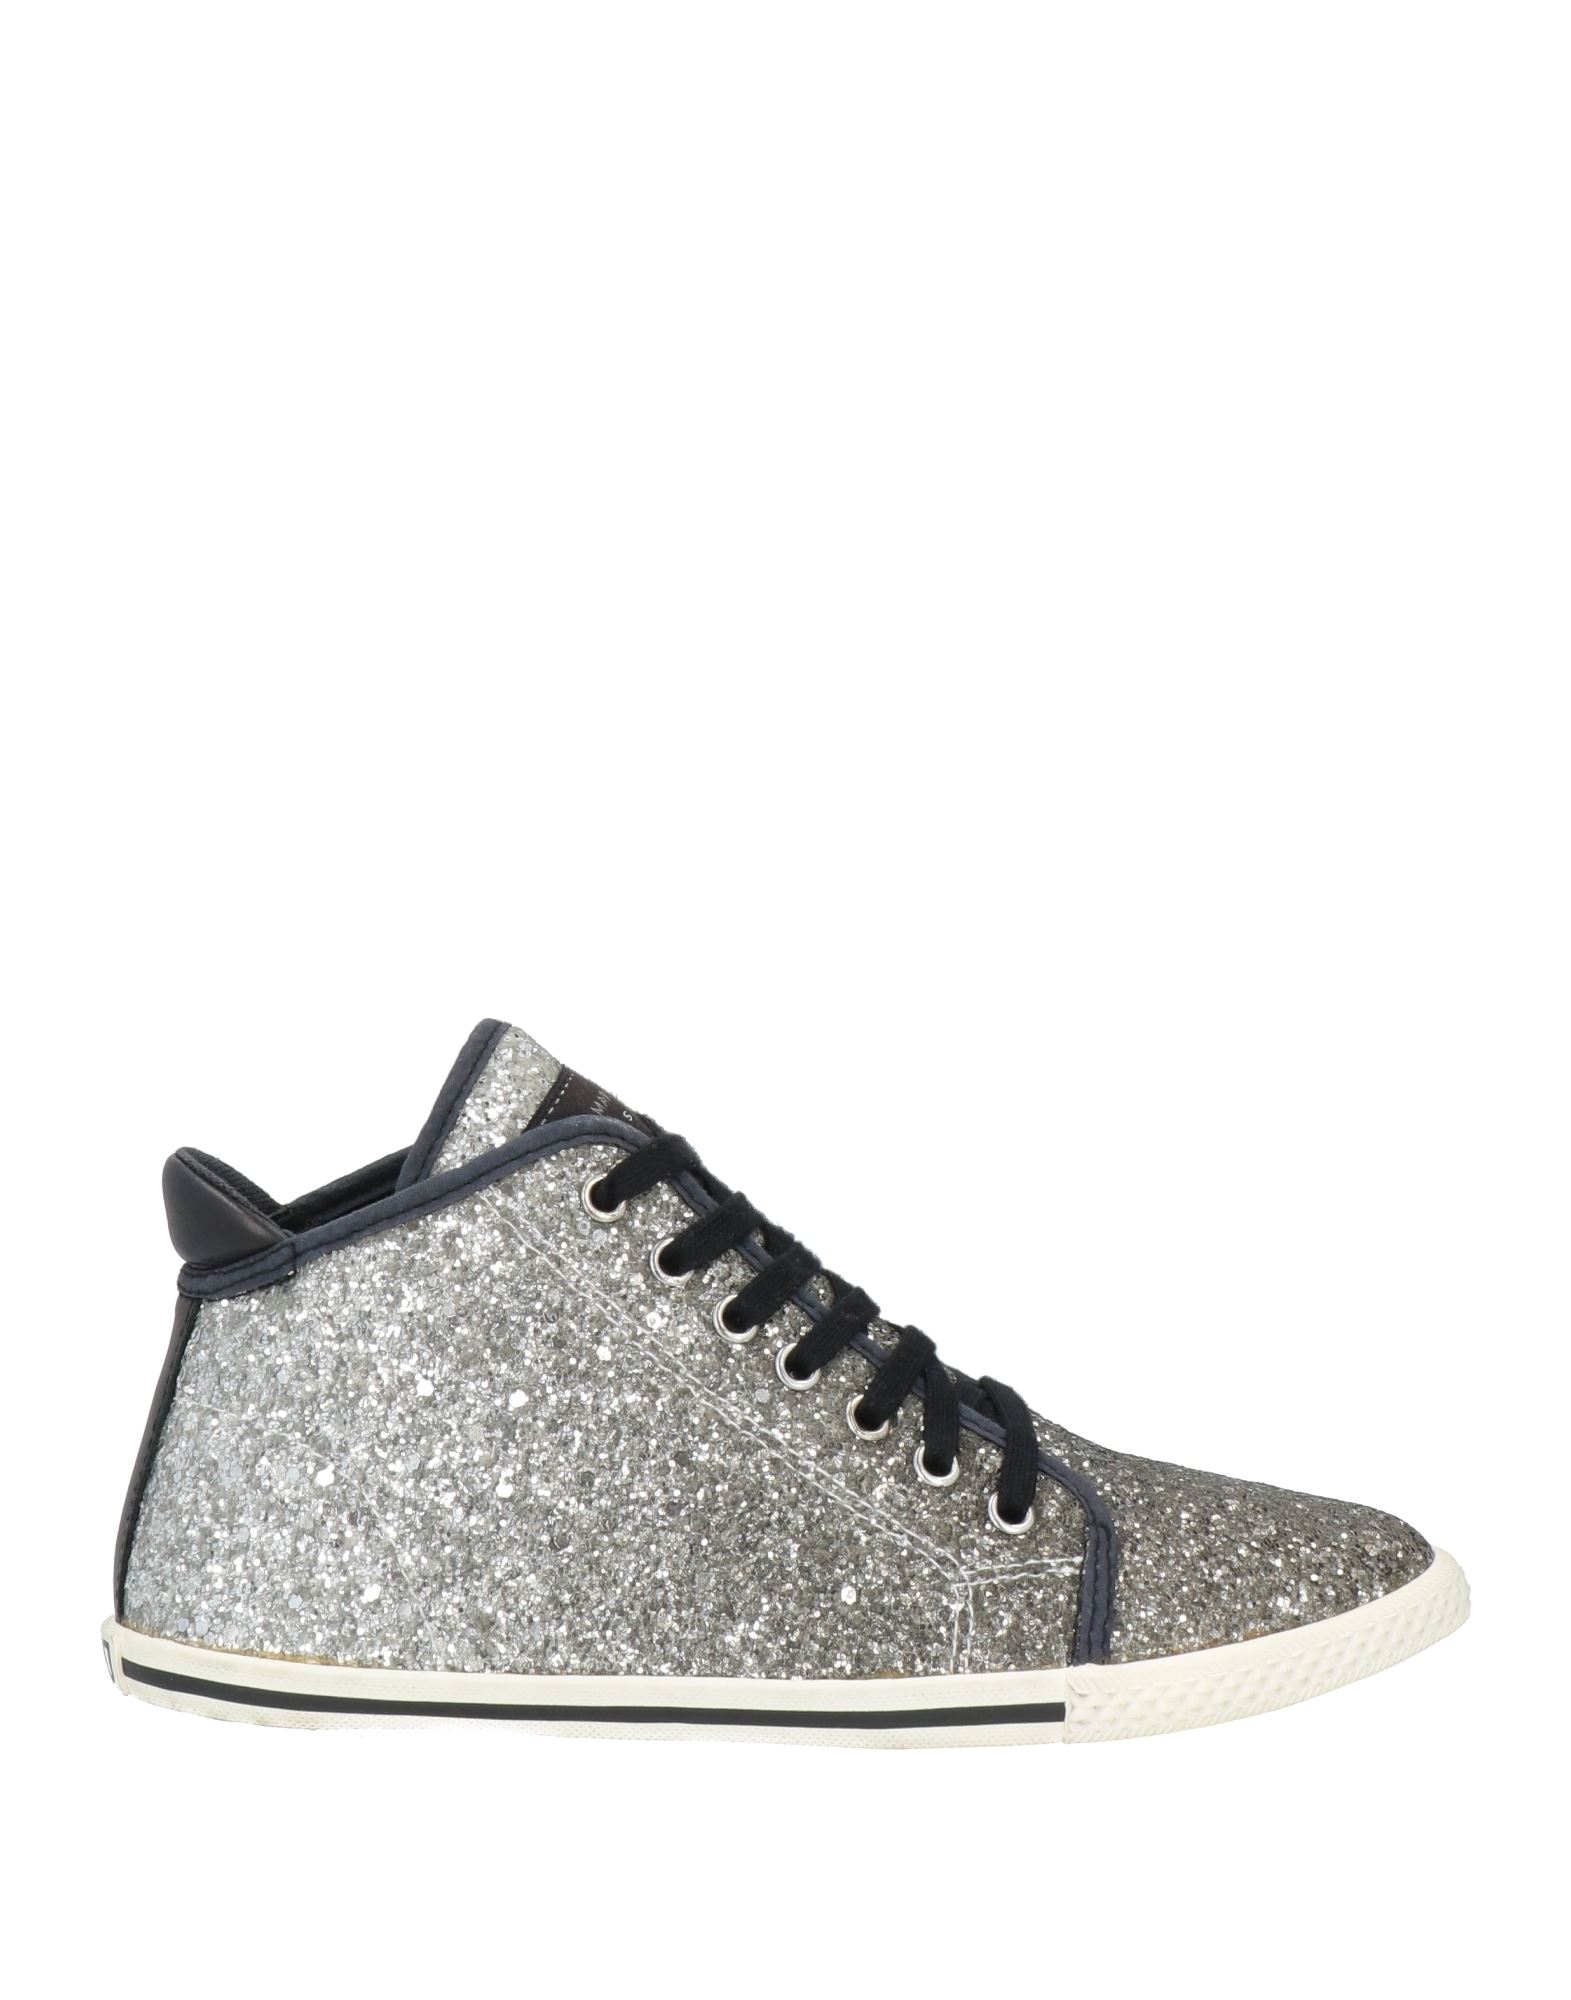 MARC BY MARC JACOBS Sneakers Damen Silber von MARC BY MARC JACOBS